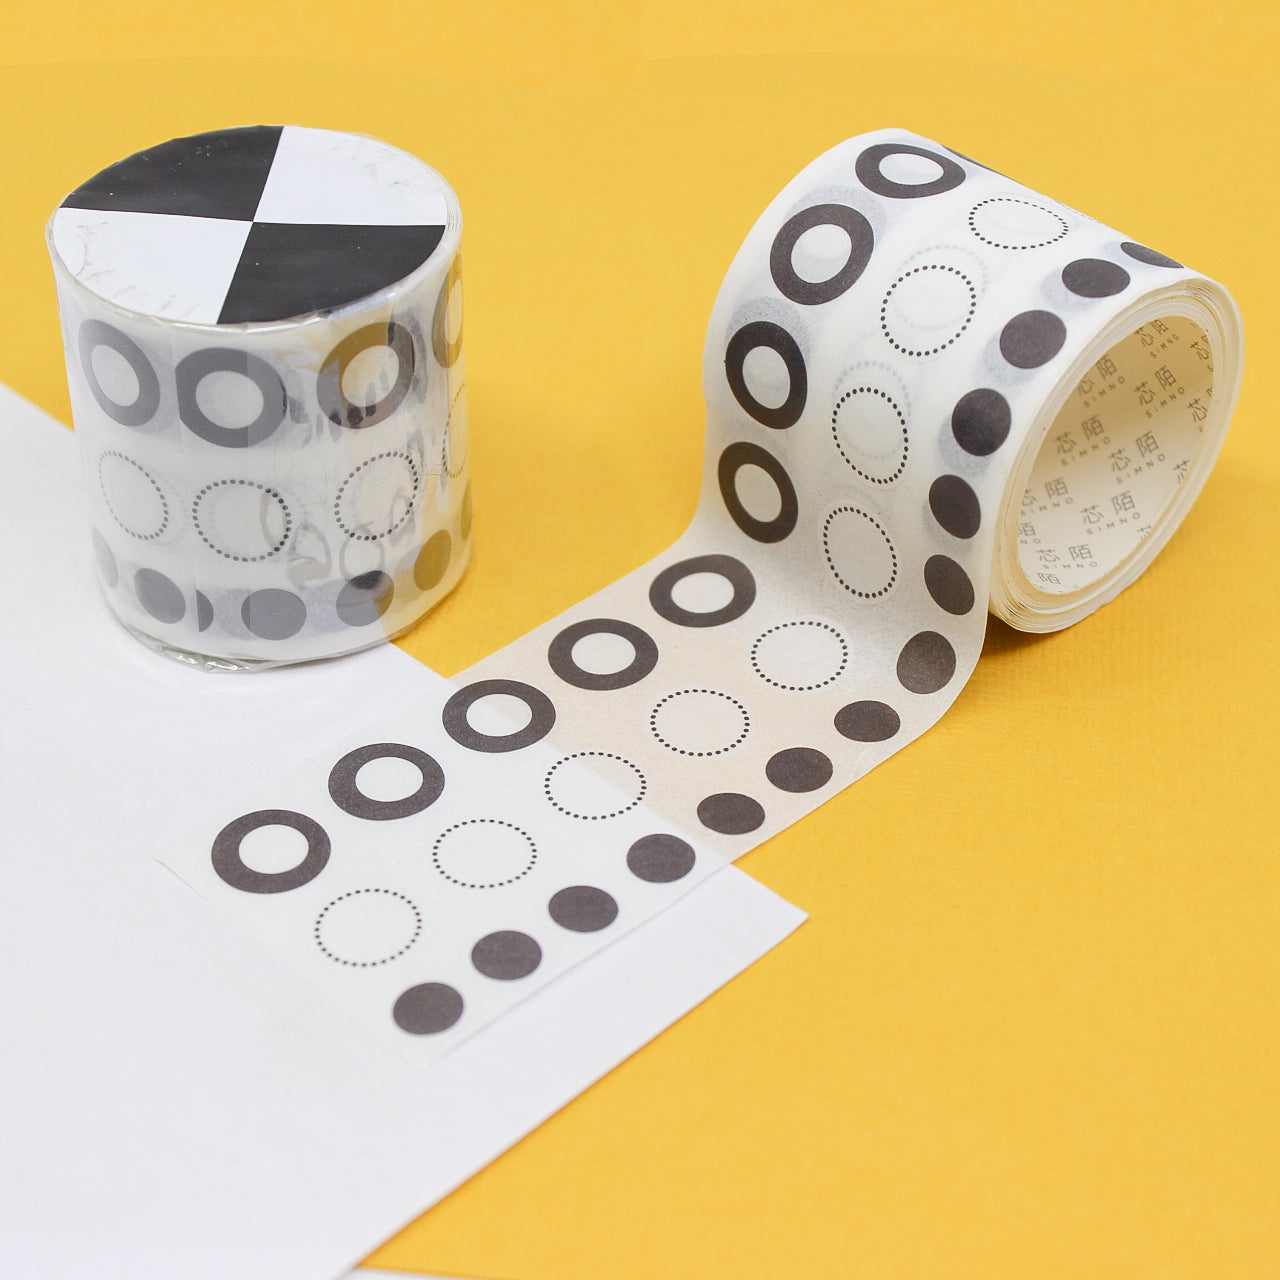 Stay organized with our Black and White Checklist Washi Tape, featuring a classic checklist design in a timeless black and white palette. Ideal for adding a functional and stylish touch to your planner or projects. This tape is sold at BBB Supplies Craft Shop.